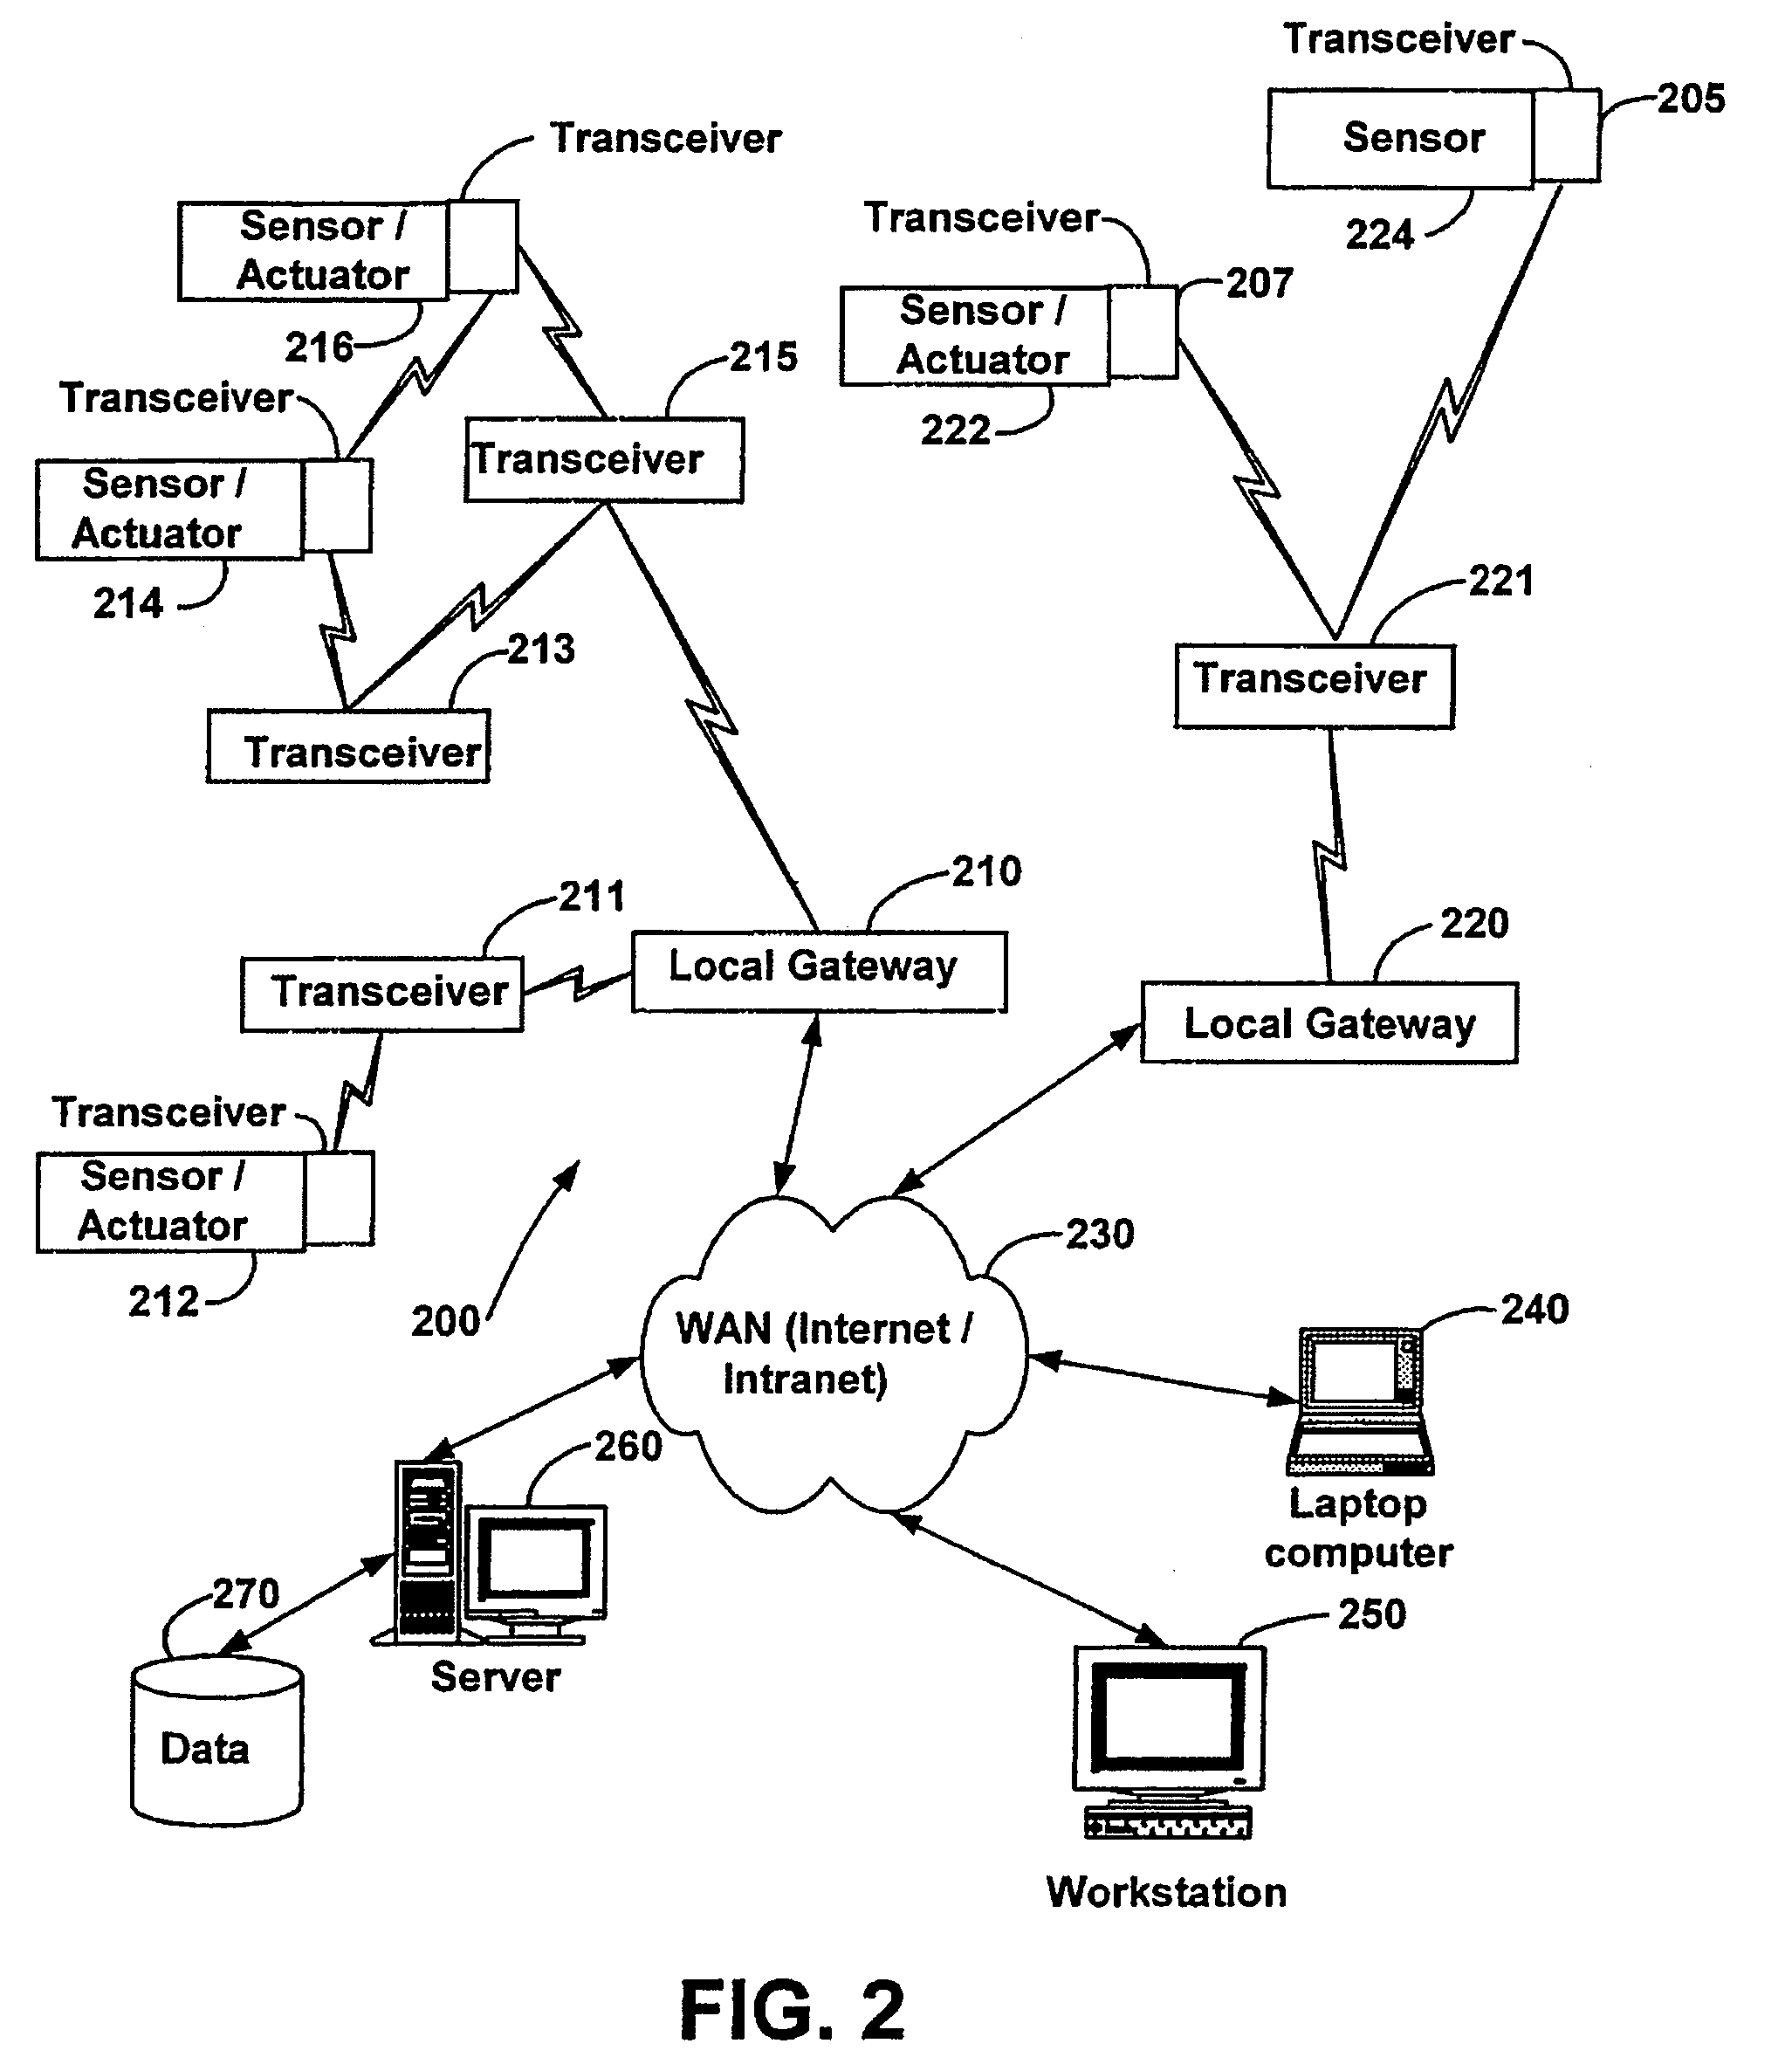 Systems and methods for monitoring and controlling remote devices